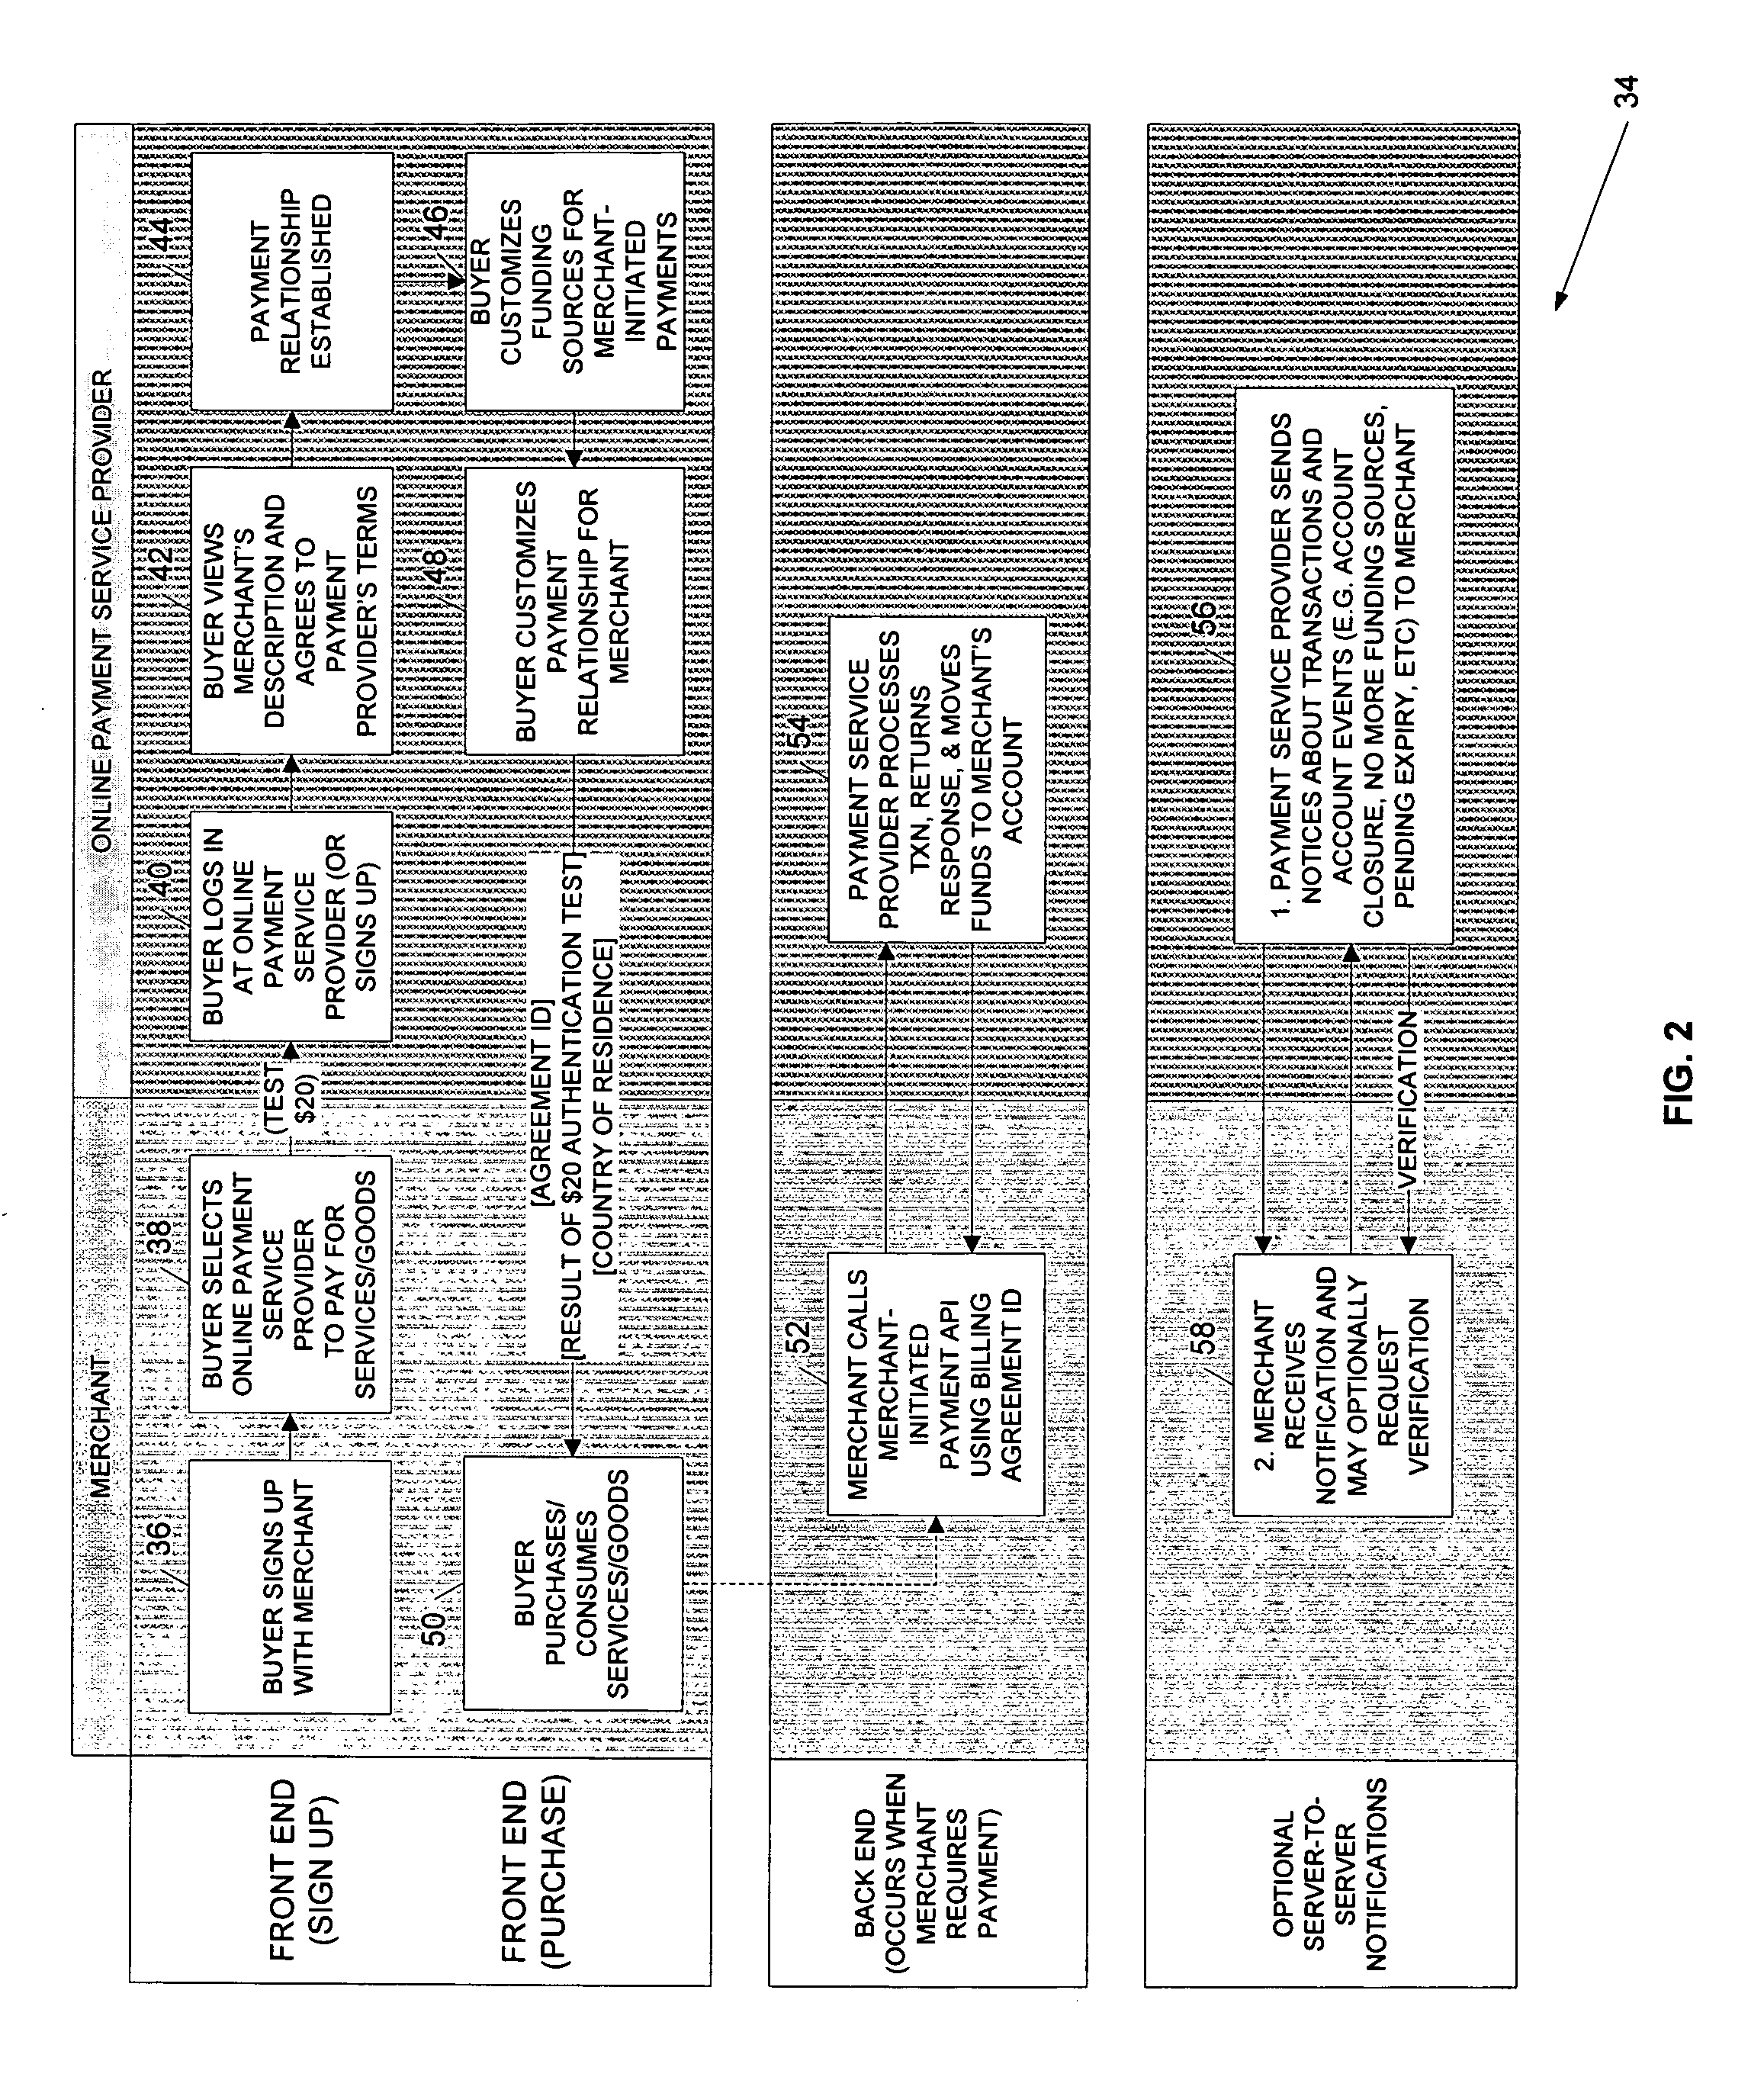 Method and system for facilitating merchant-initiated online payments